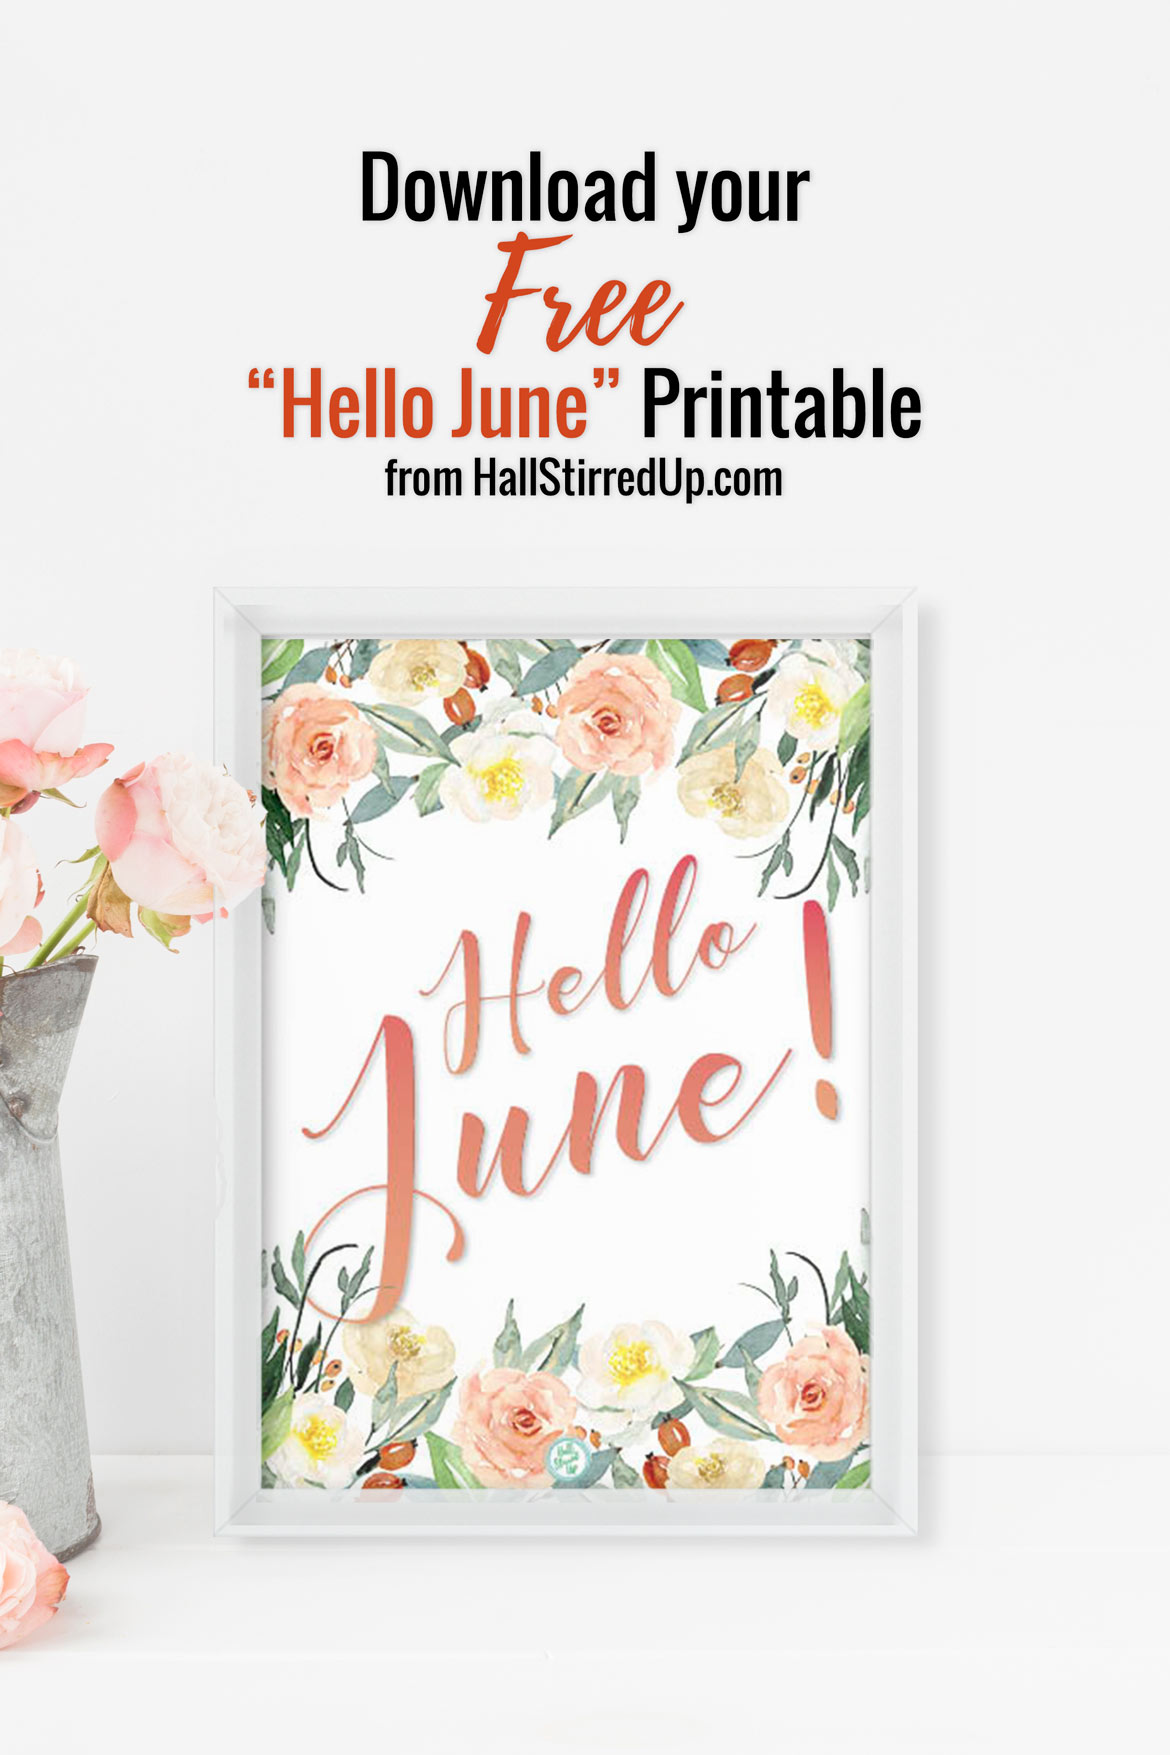 Hello Sweet June Download your free printable